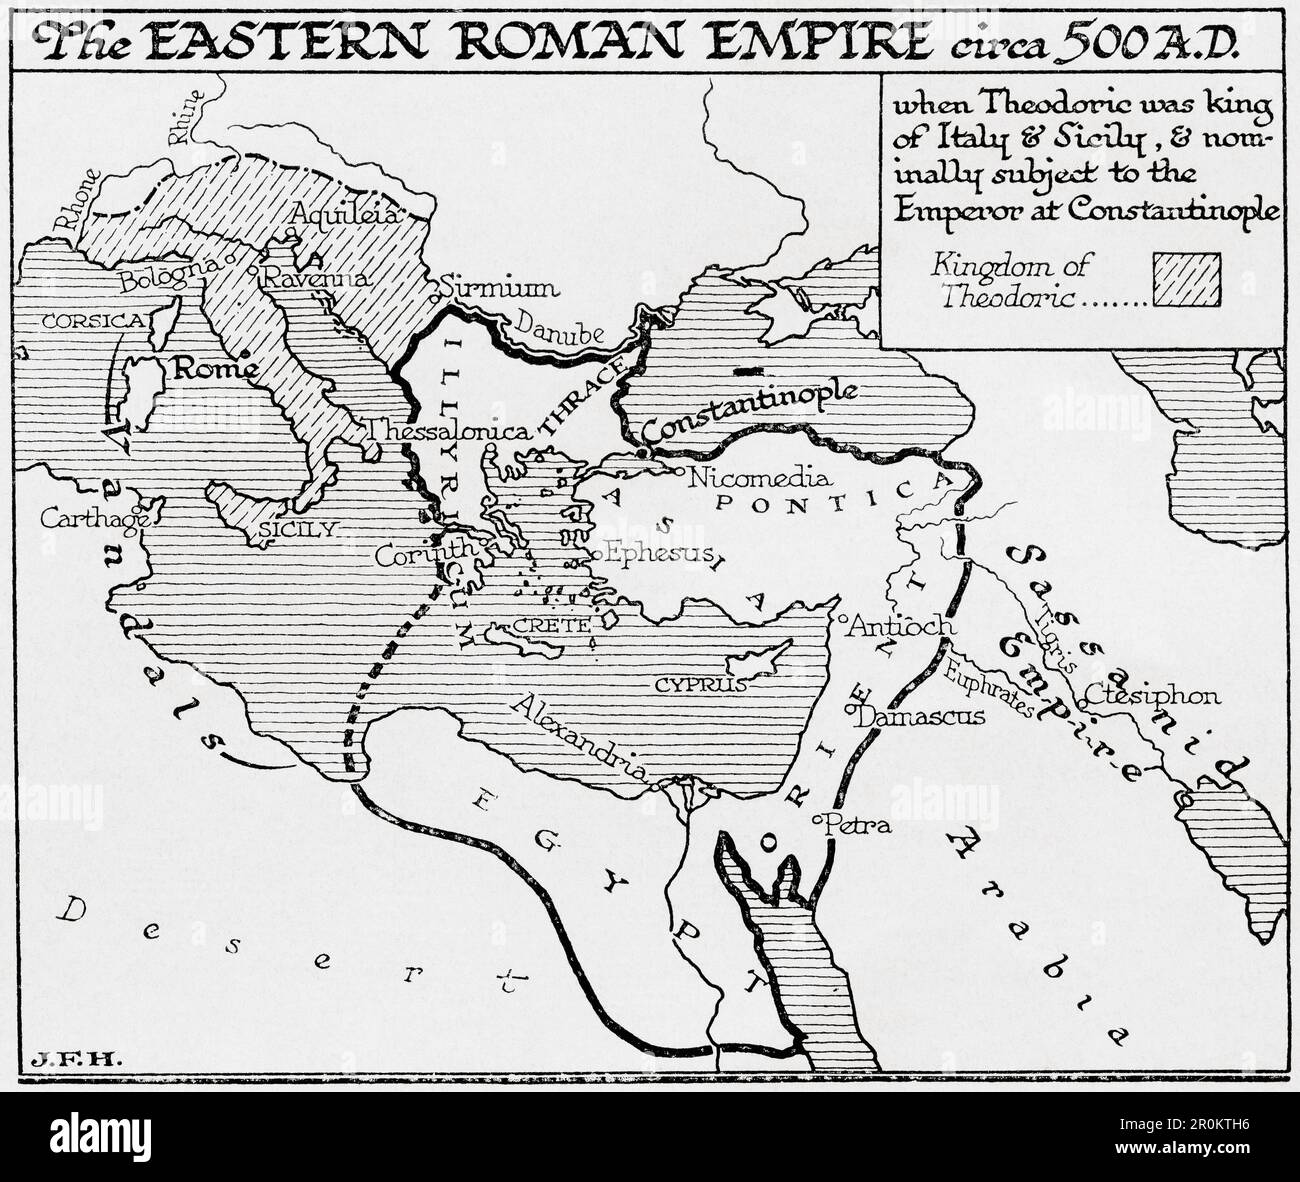 Map of the Eastern Roman Empire c. 500 AD, when Theodoric was king of Italy and Sicily and nominally subject to the emperor at Constantinople.  From the book Outline of History by H.G. Wells, published 1920. Stock Photo